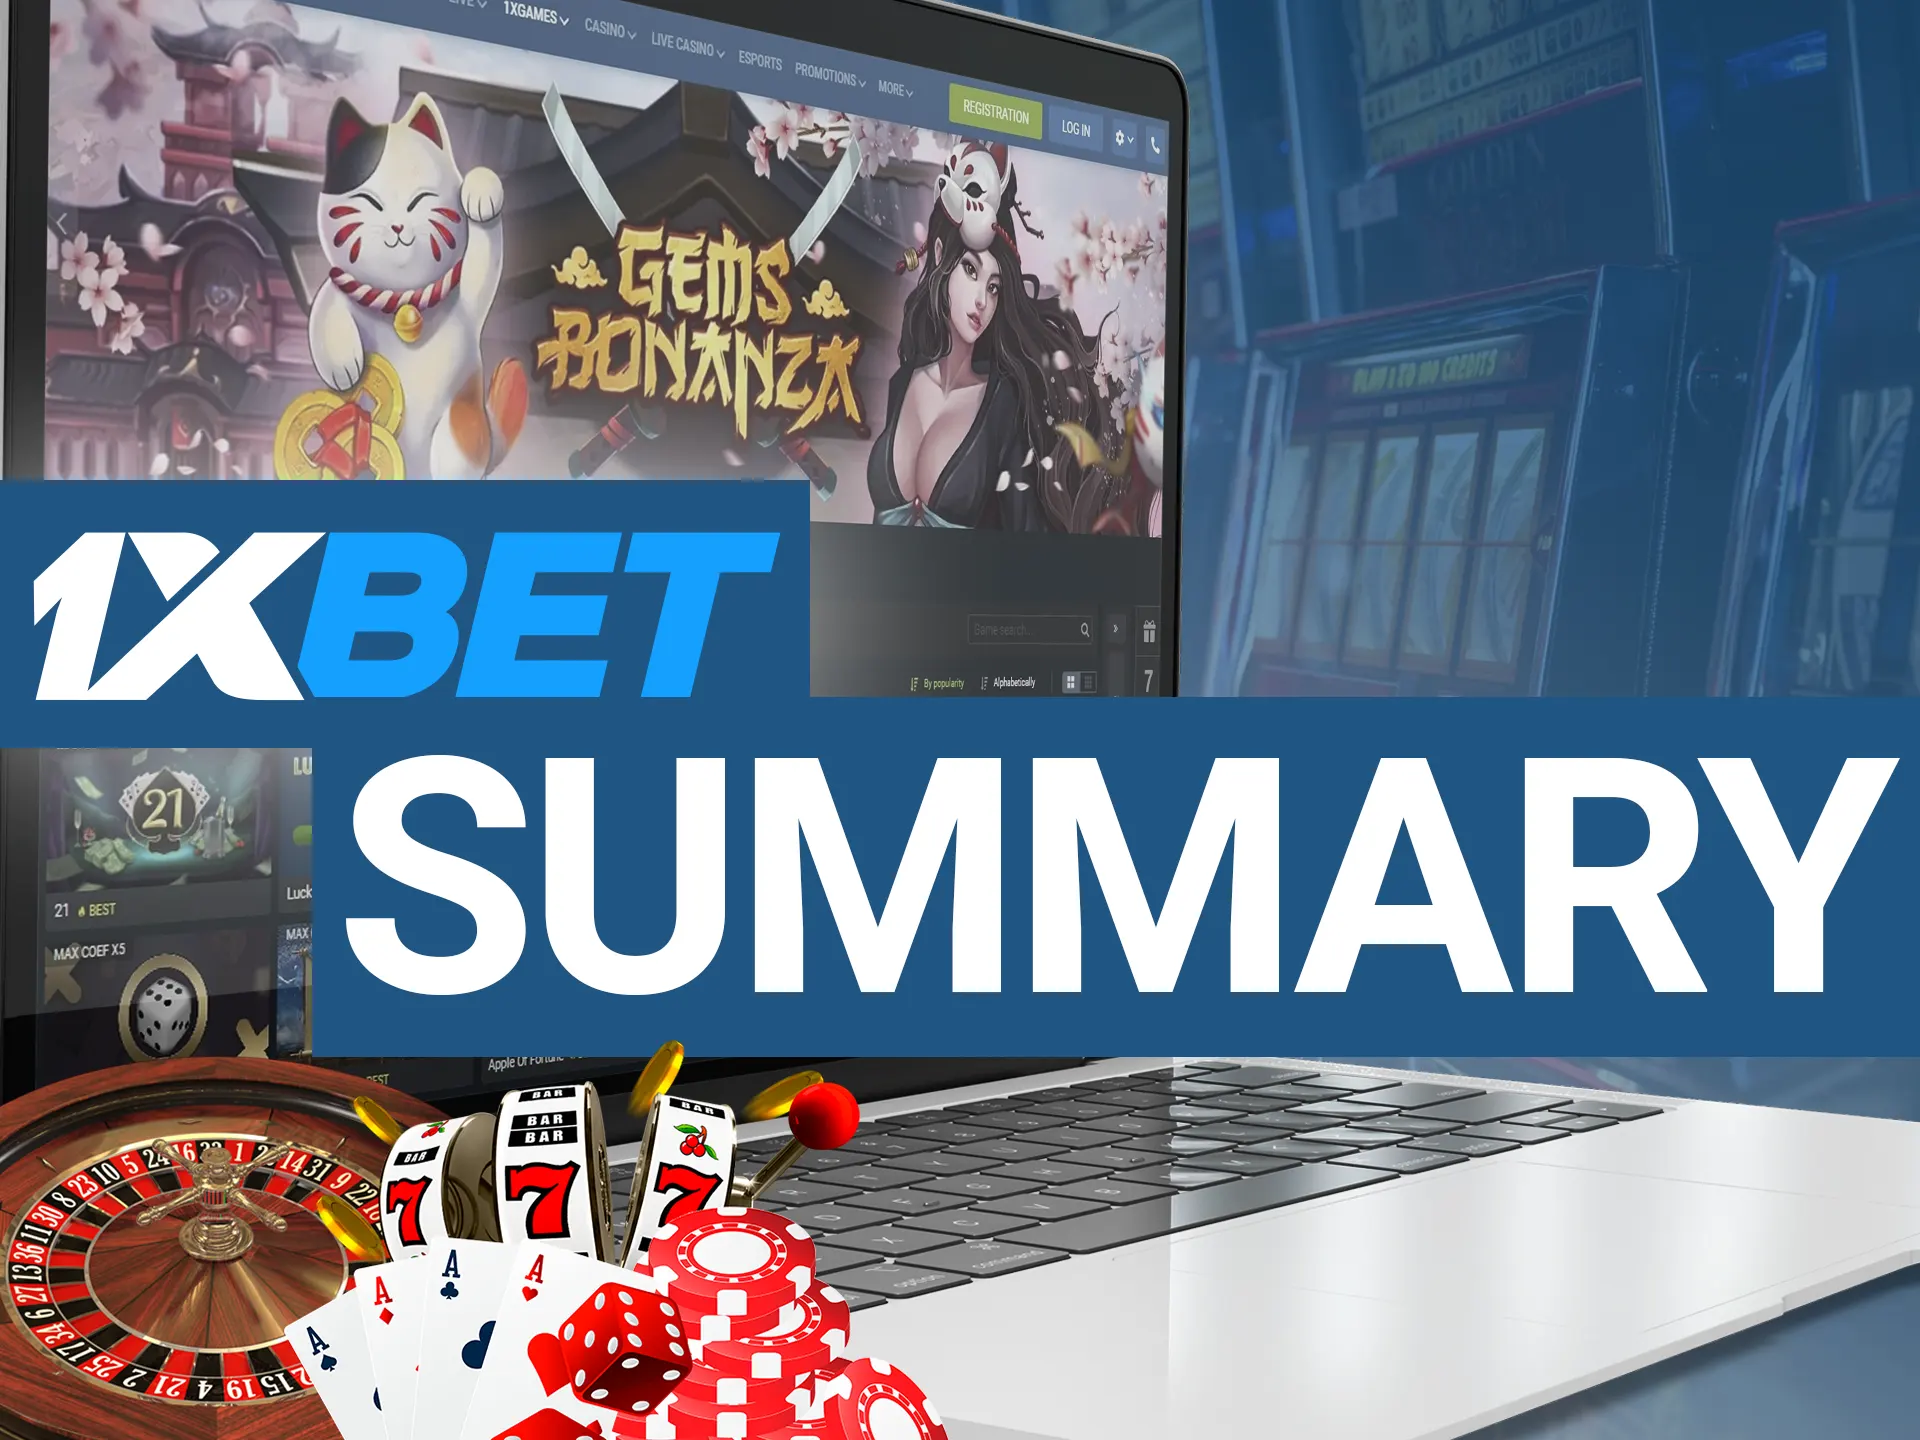 1xBet offers a huge selection of games and much more.